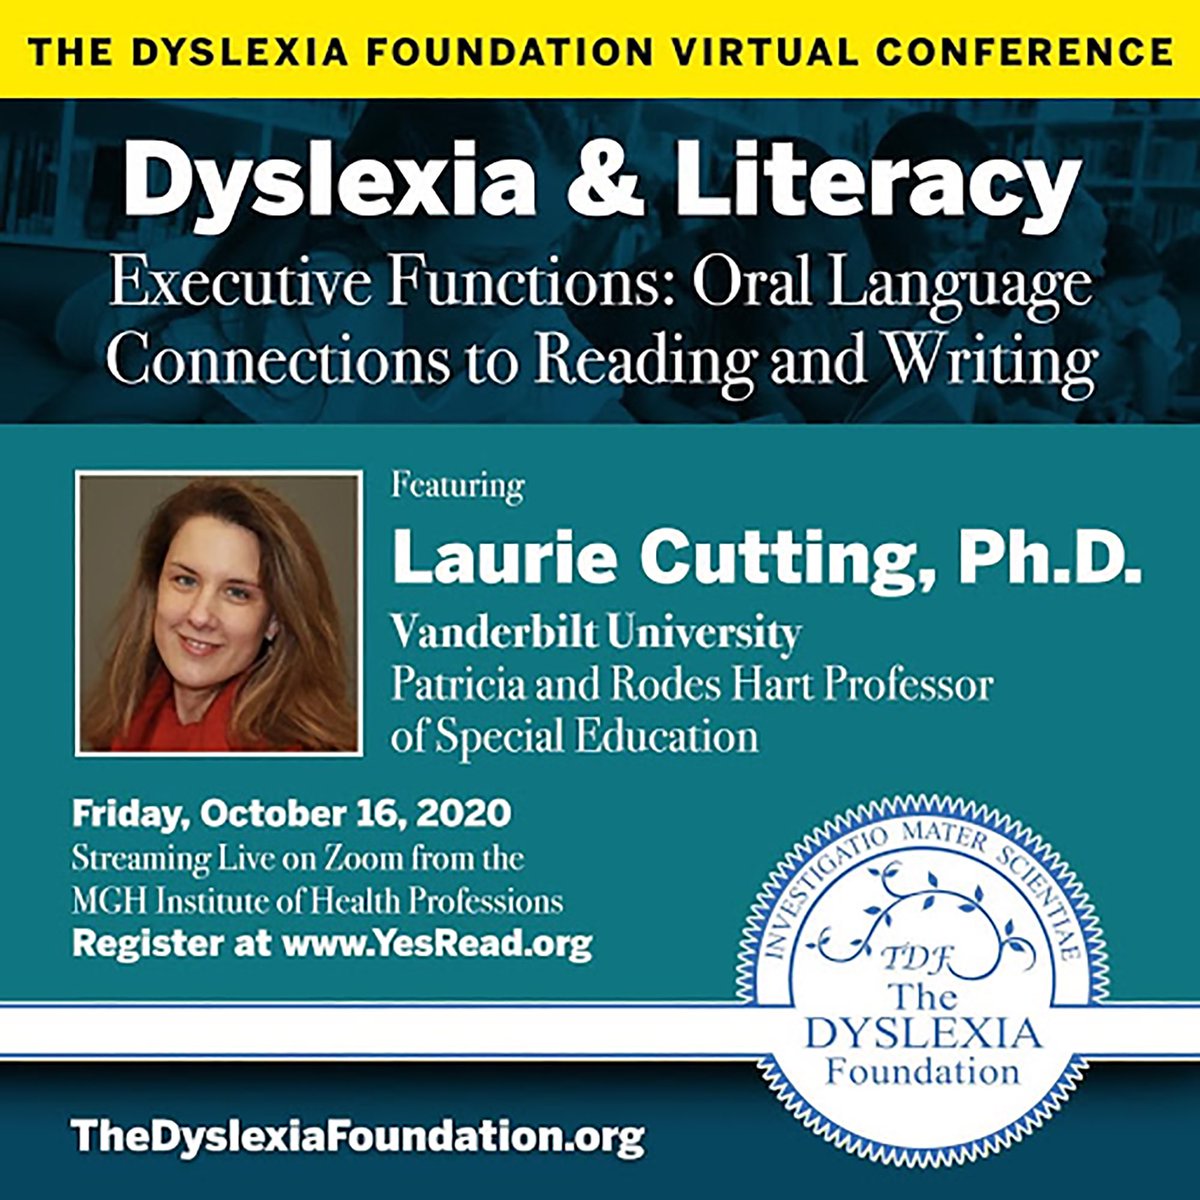 To learn more and to register for the conference, visit: yesread.org #thedyslexiafoundation #dyslexia #literacy